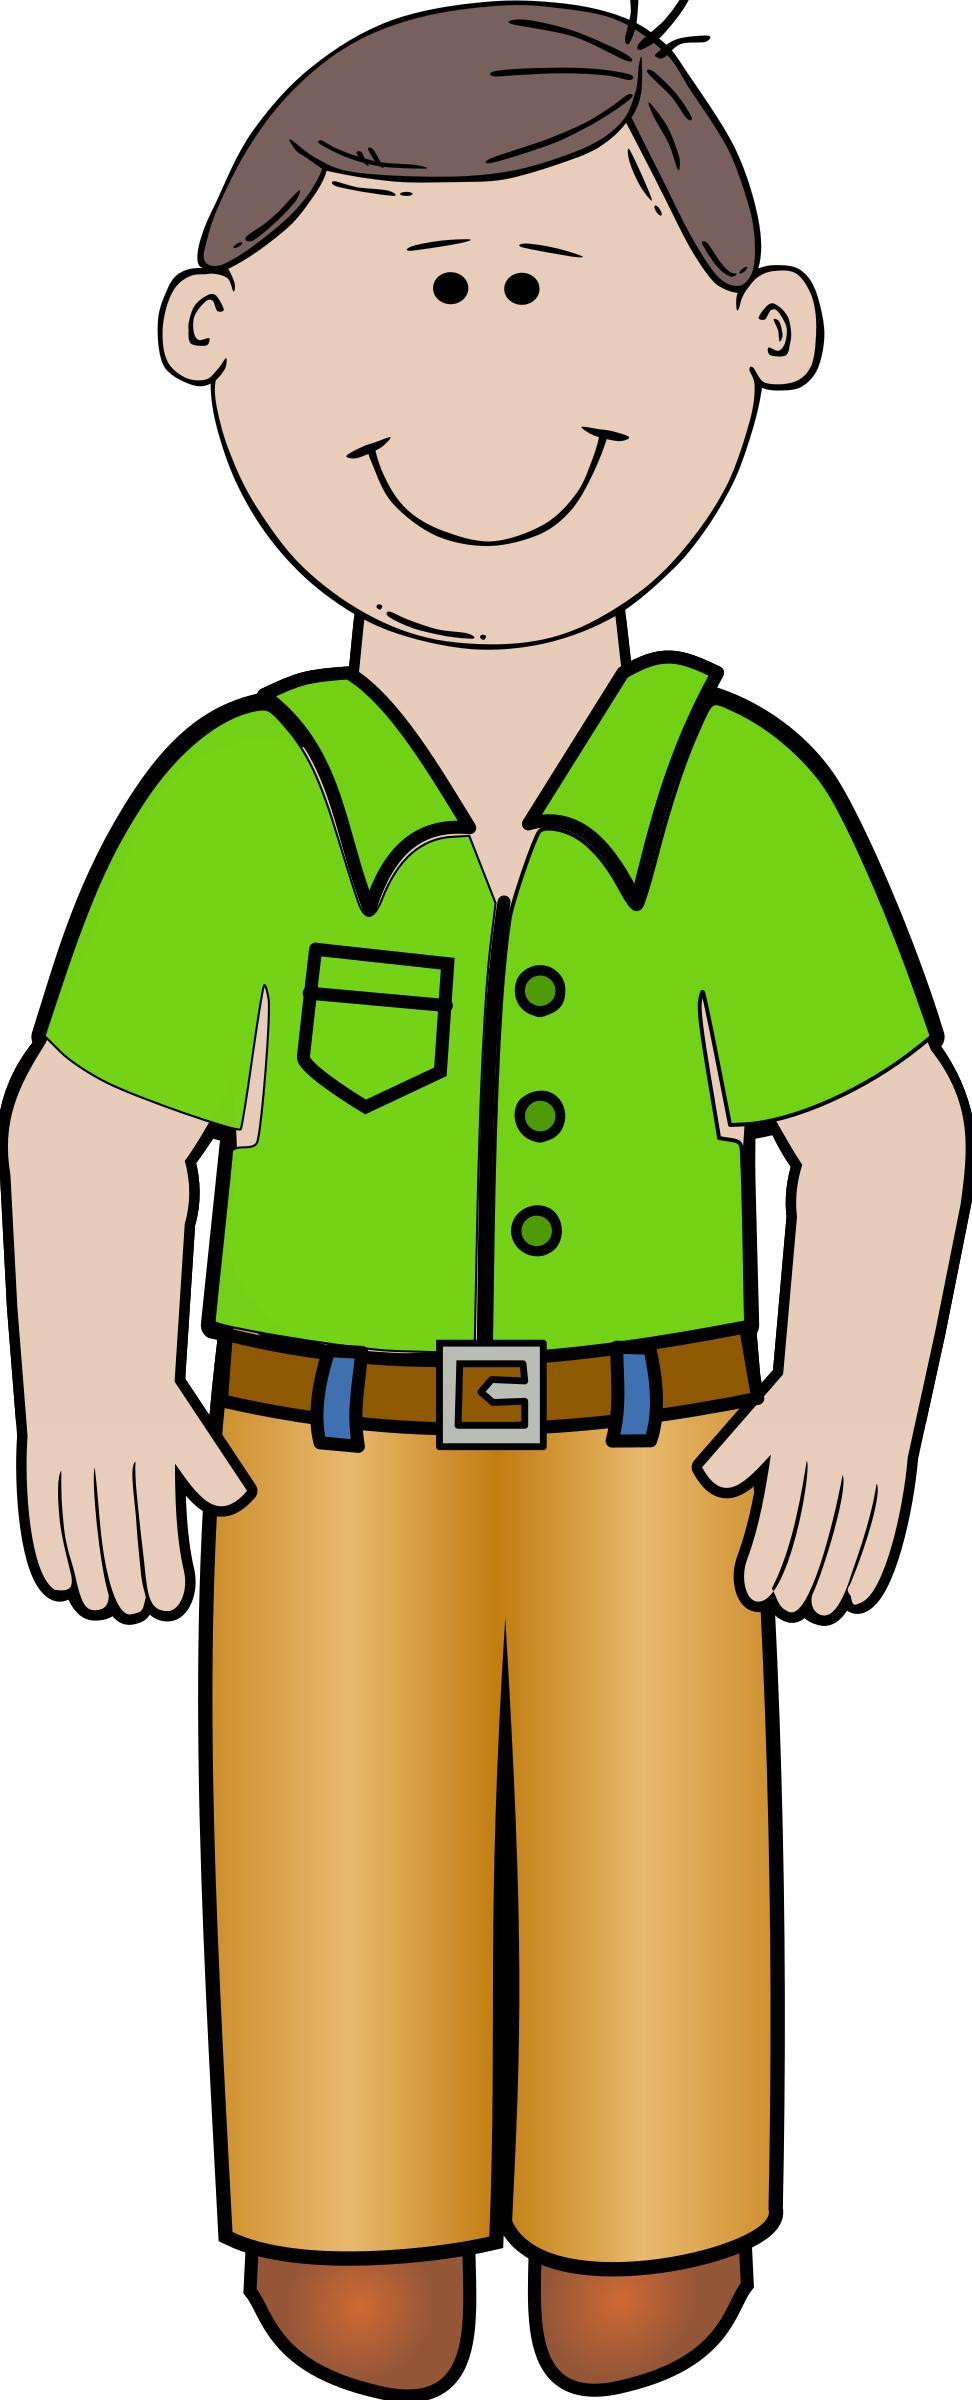 daddy standing 02 png transparent